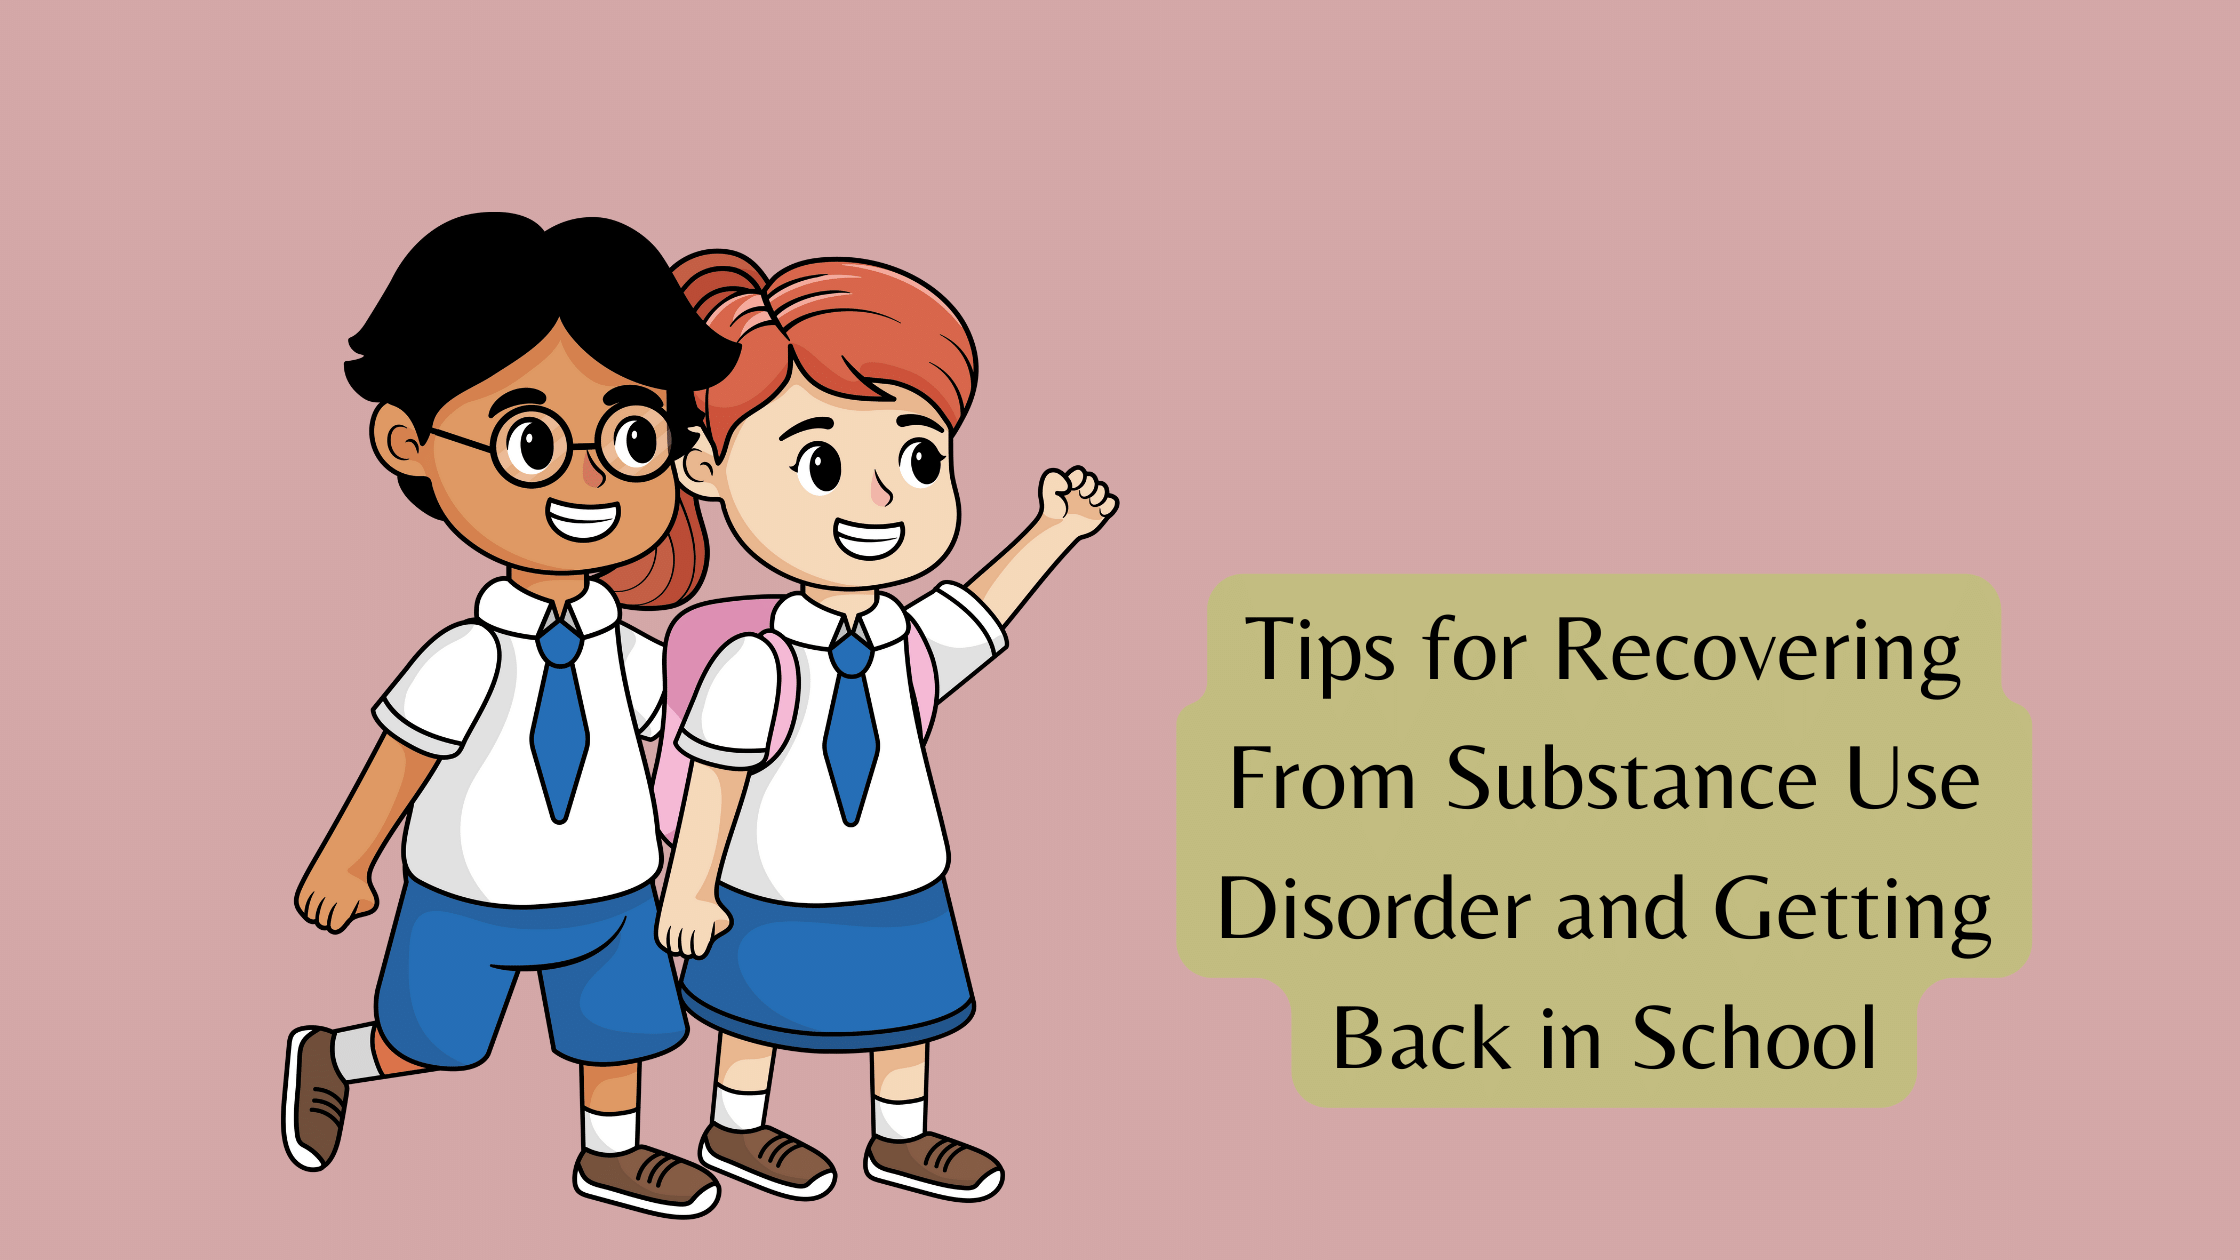 Recovering From Substance Use Disorder and Getting Back in School